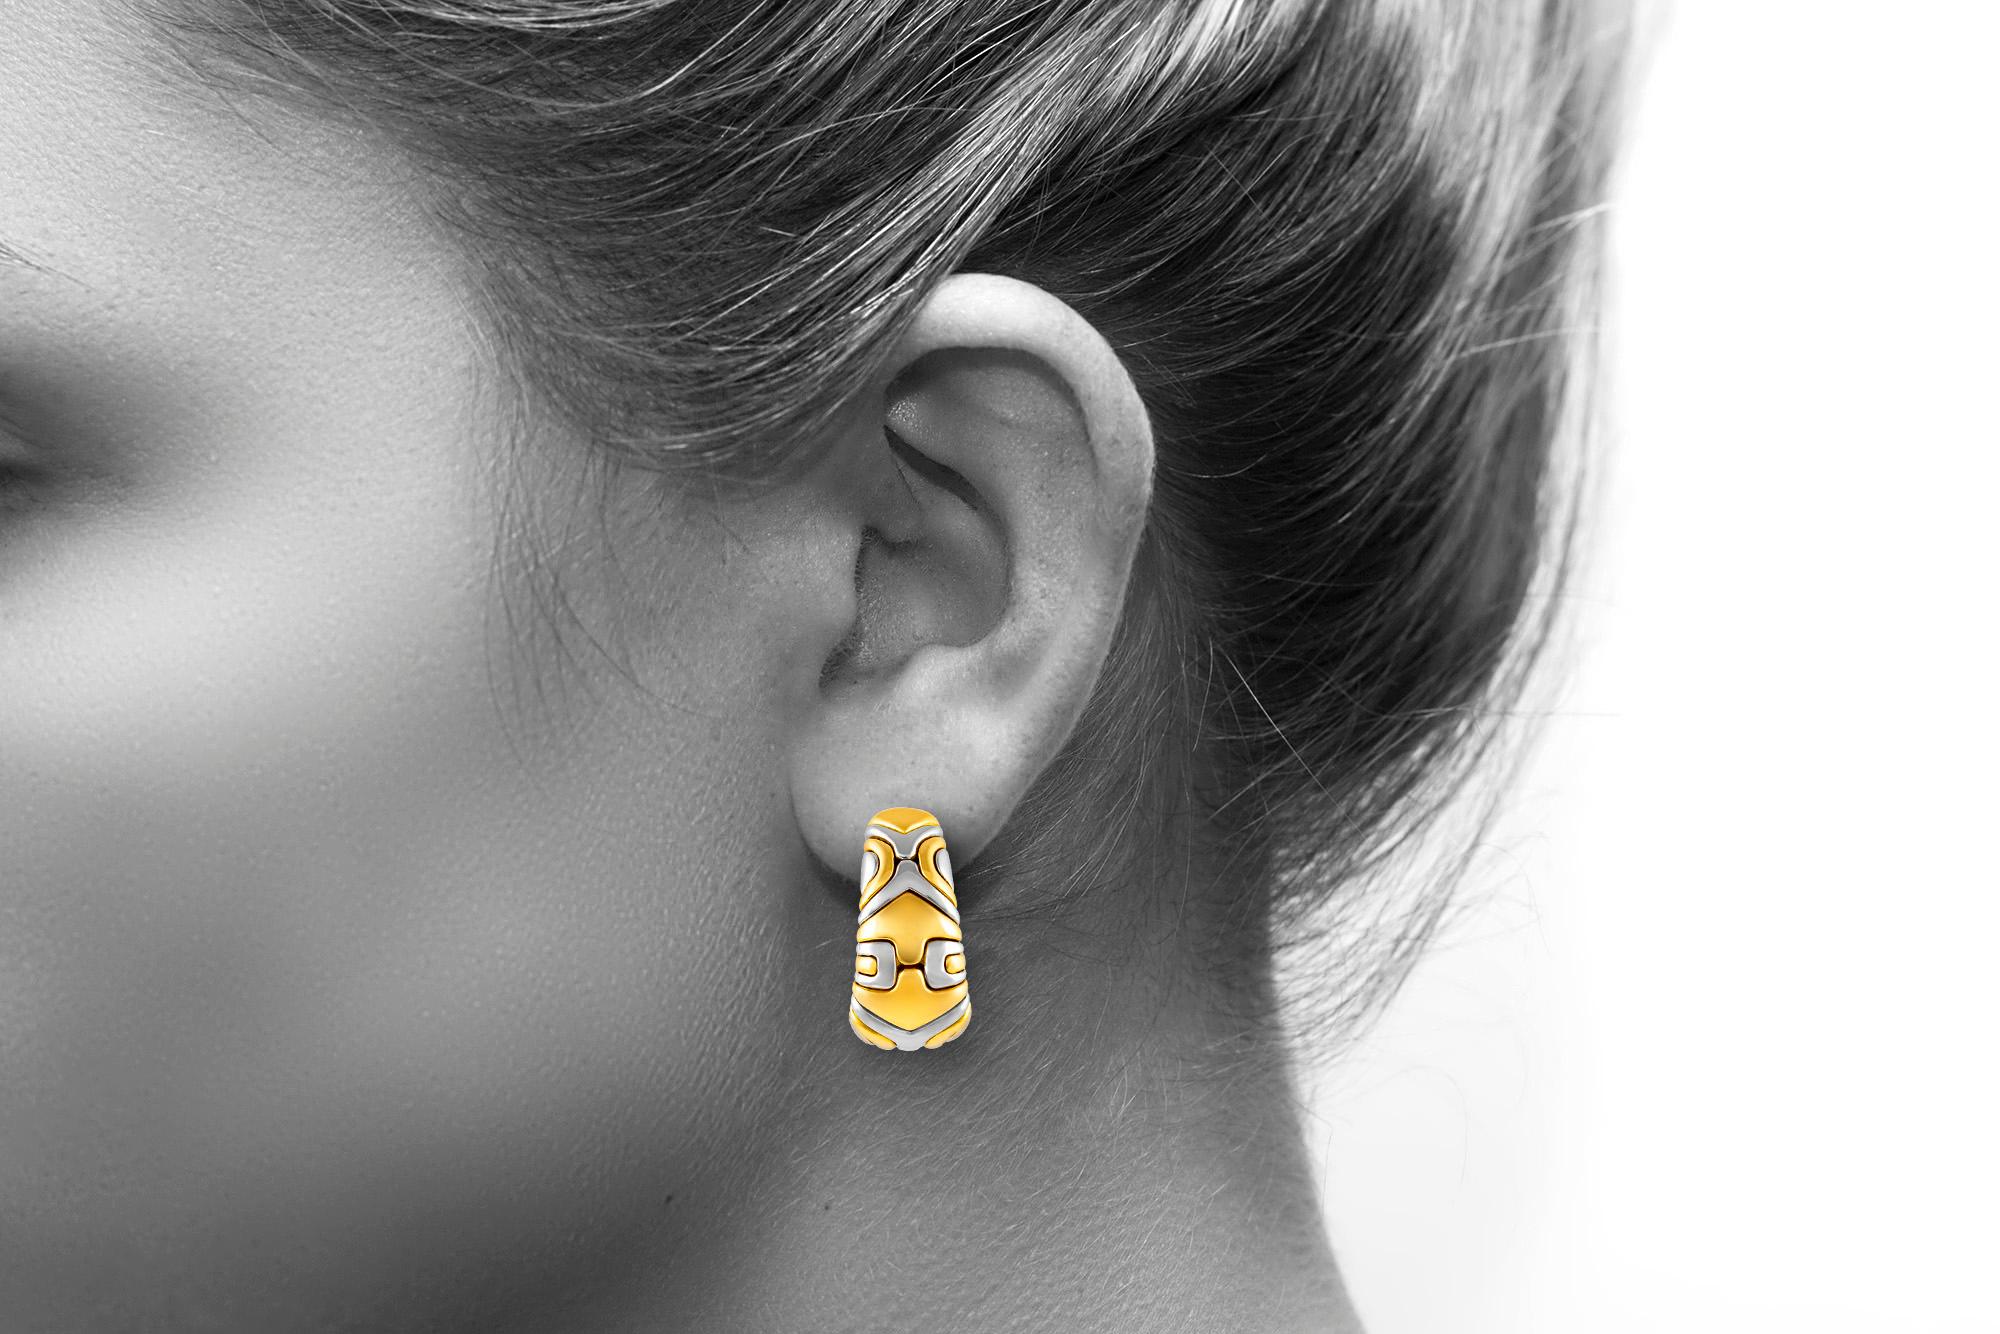 Bvlgari Parentesi earrings finely crafted in 18 k yellow gold and stainless steel. Large model